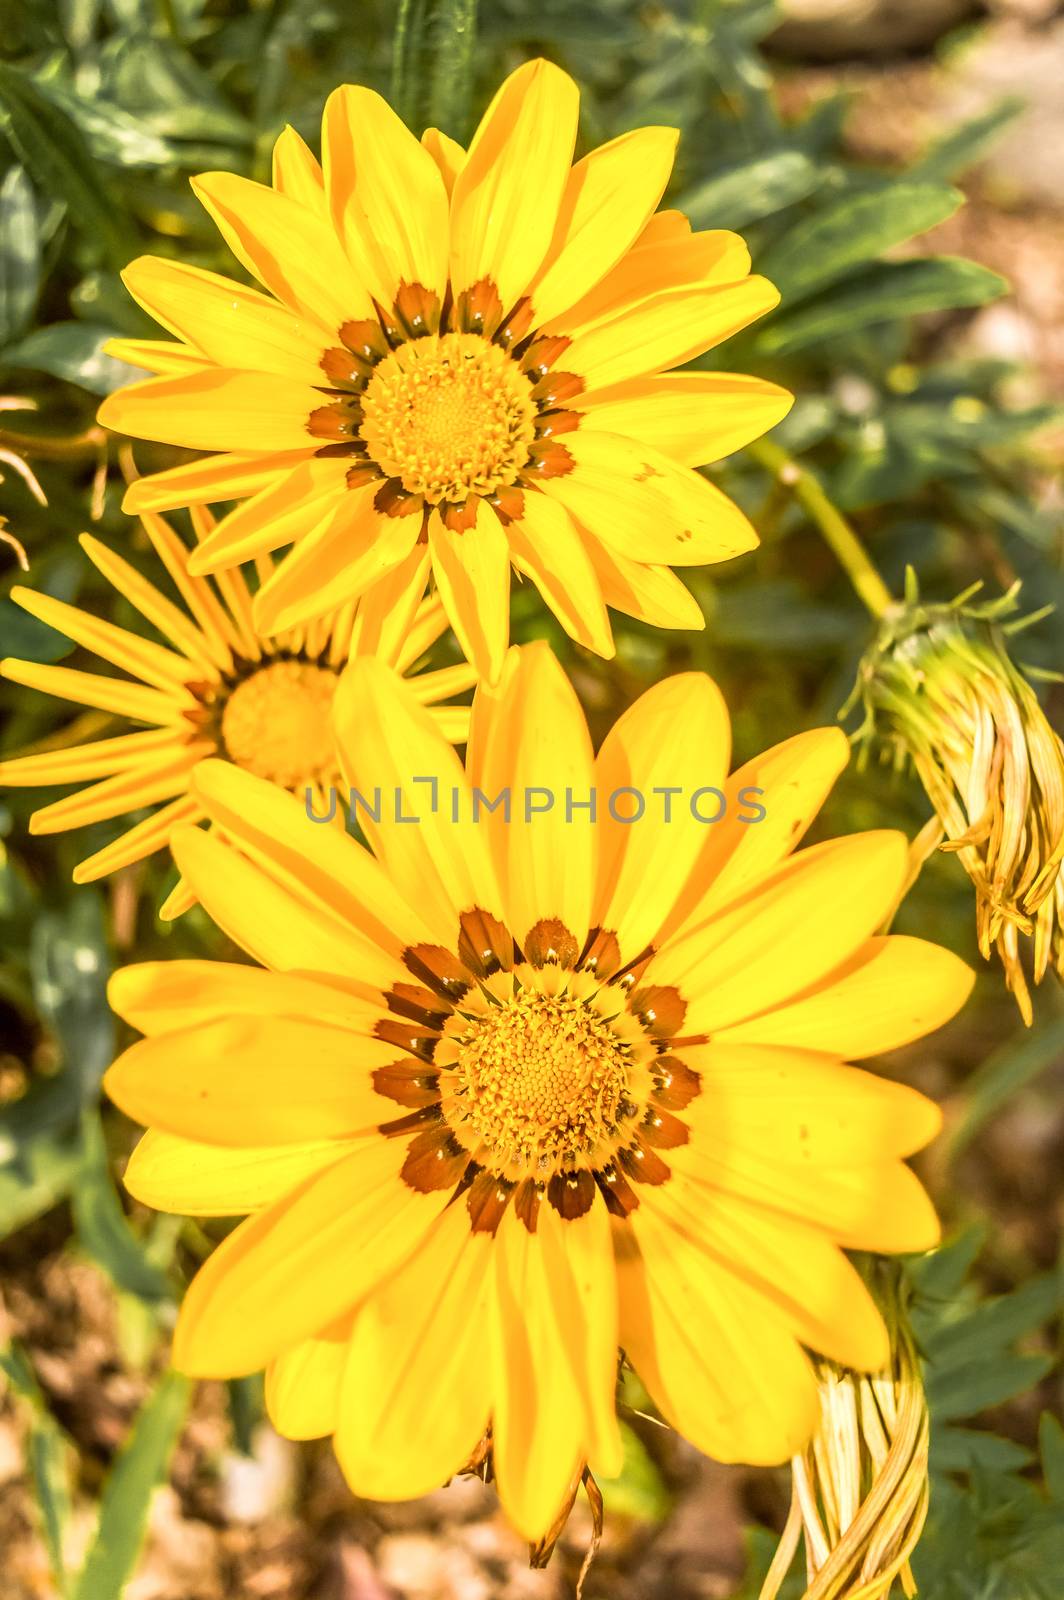 Gazania African daisies, daisy like composite flower shades of yellow, growing in summer. Its a flowering plants in Asteraceae family of Southern Africa. by sudiptabhowmick